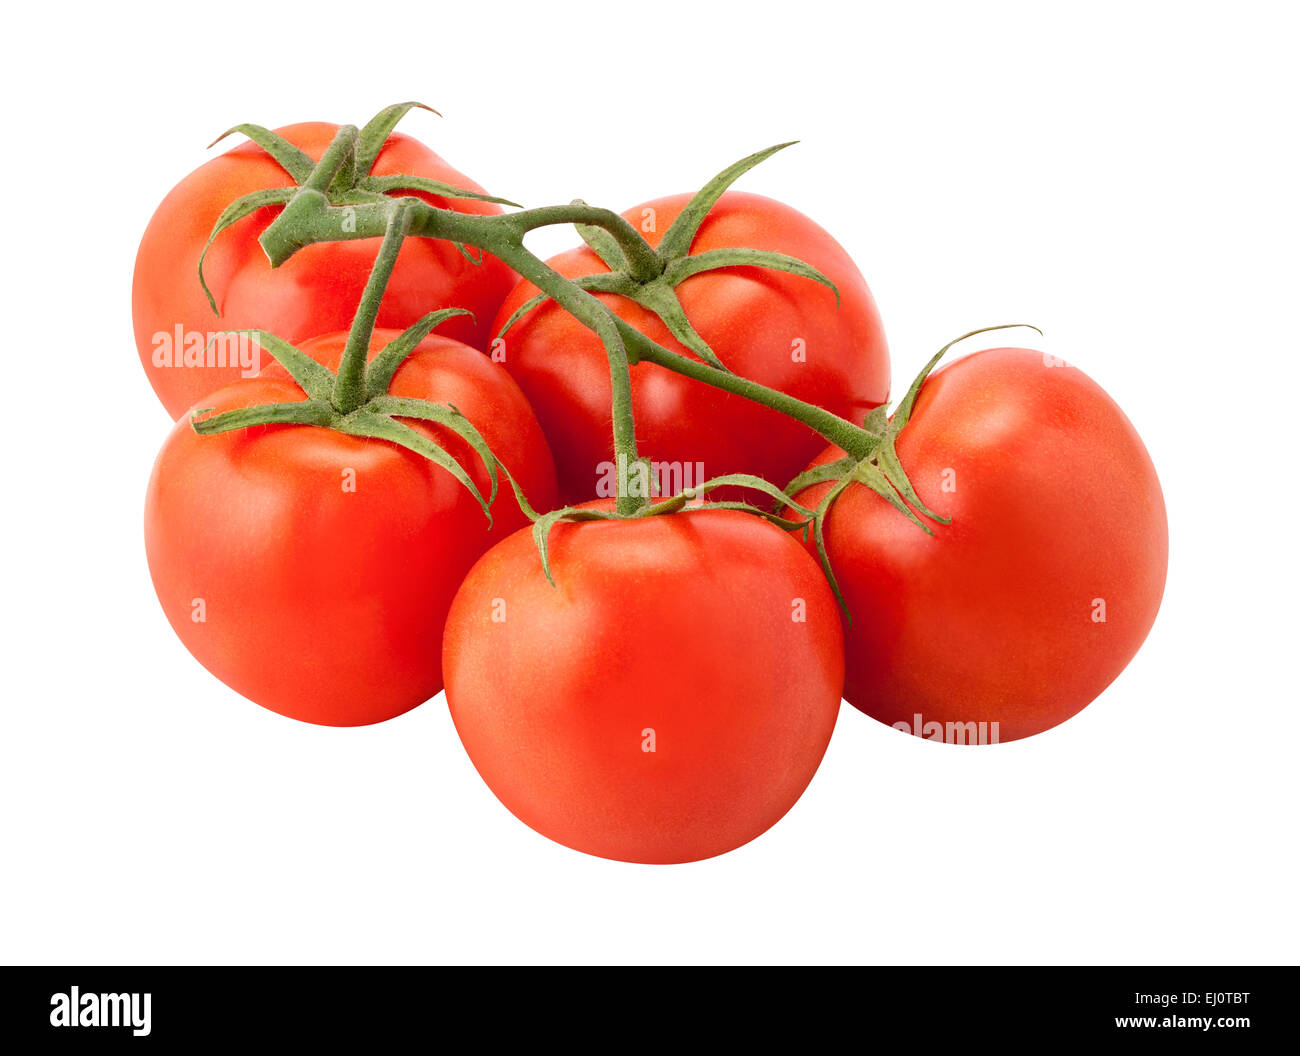 Tomatoes on the Vine isolated on white Stock Photo